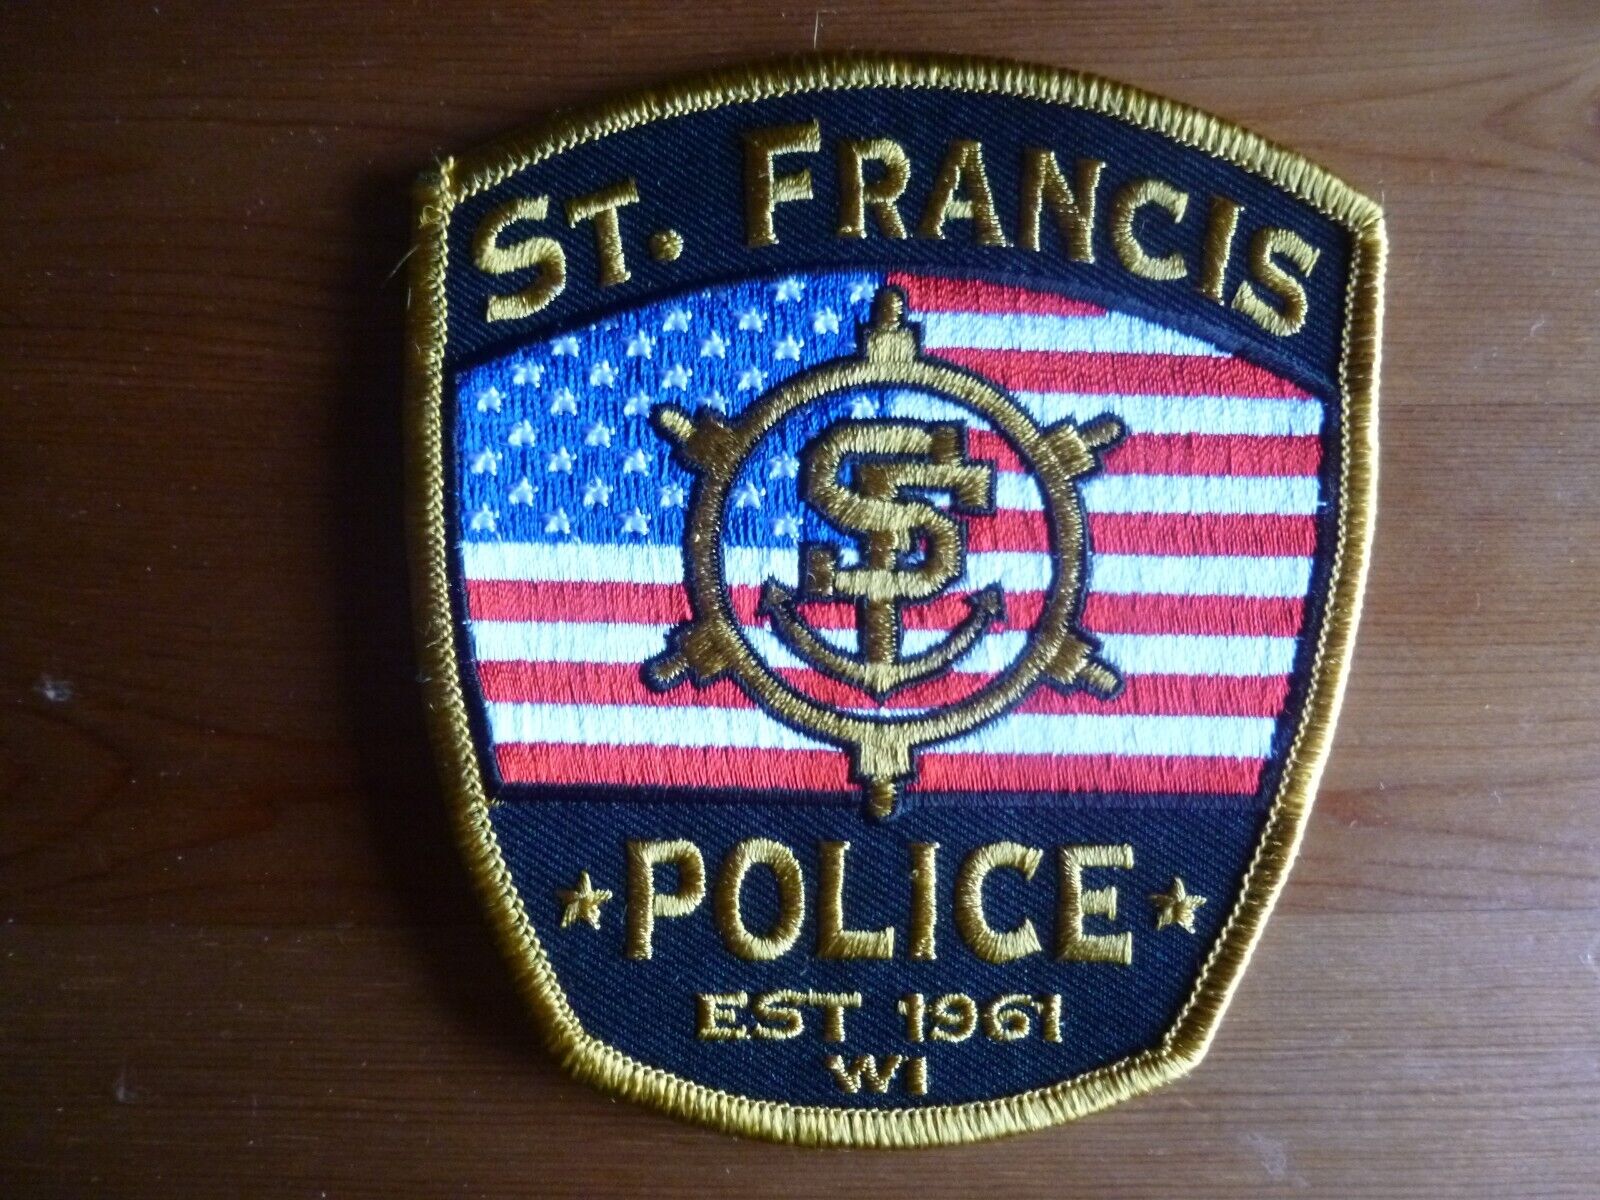 ST FRANCIS WISCOINSIN POLICE Patch WI STATE Unit USA obsolete Original